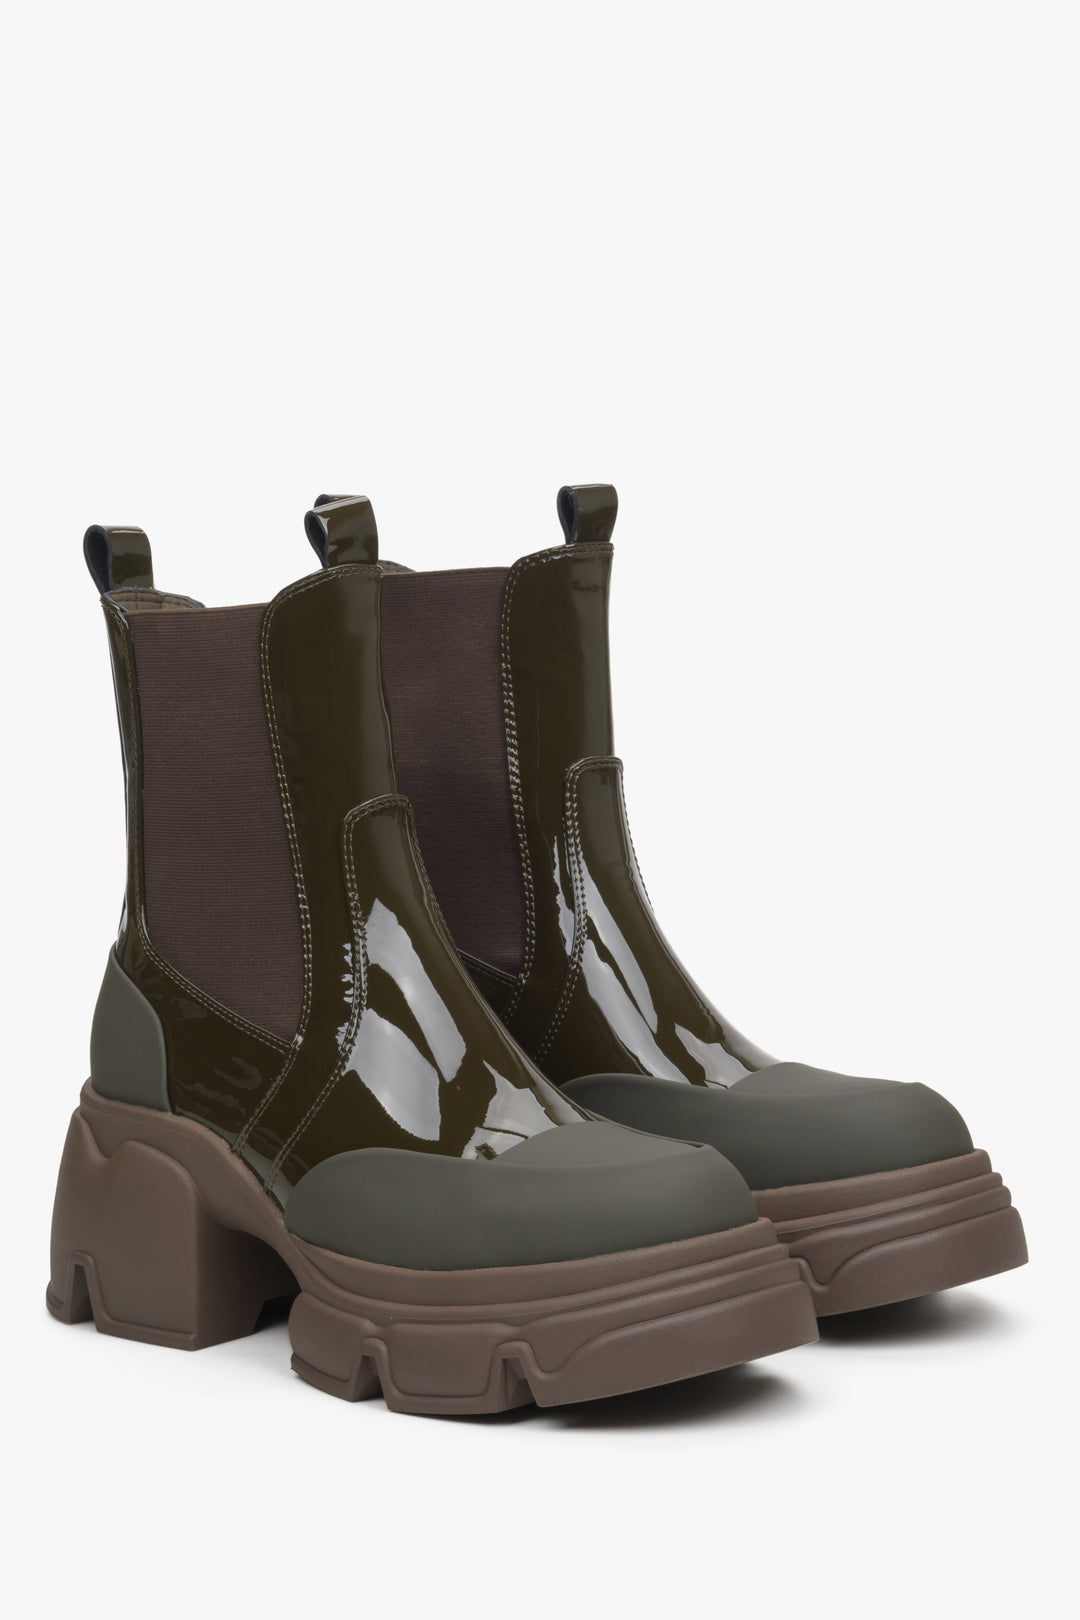 Women's leather Chelsea boots on a platform by Estro.